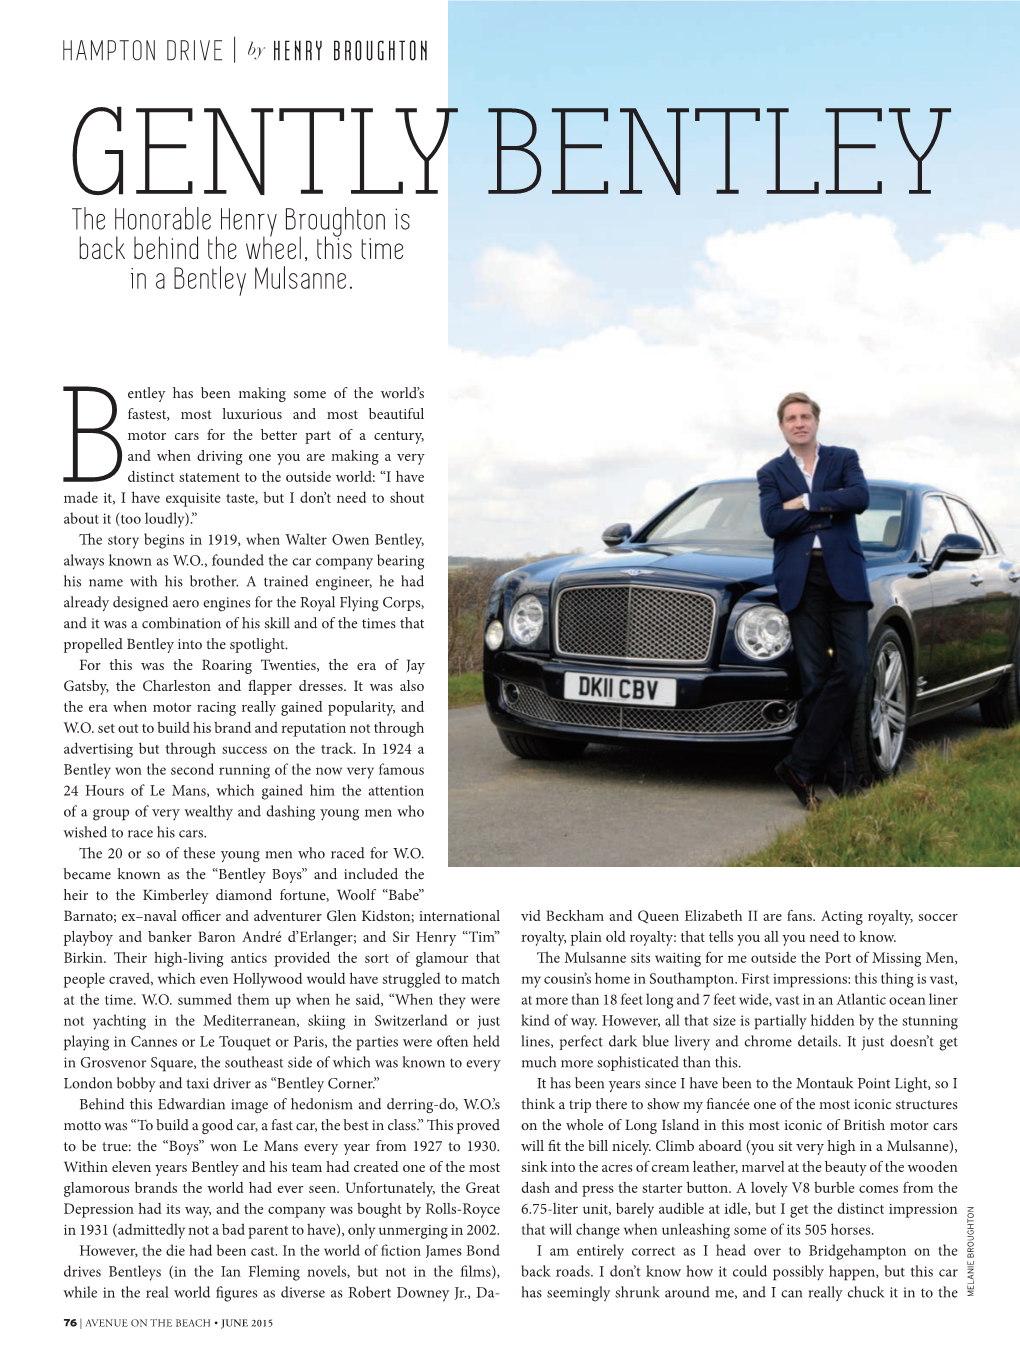 GENTLY BENTLEY the Honorable Henry Broughton Is Back Behind the Wheel, This Time in a Bentley Mulsanne